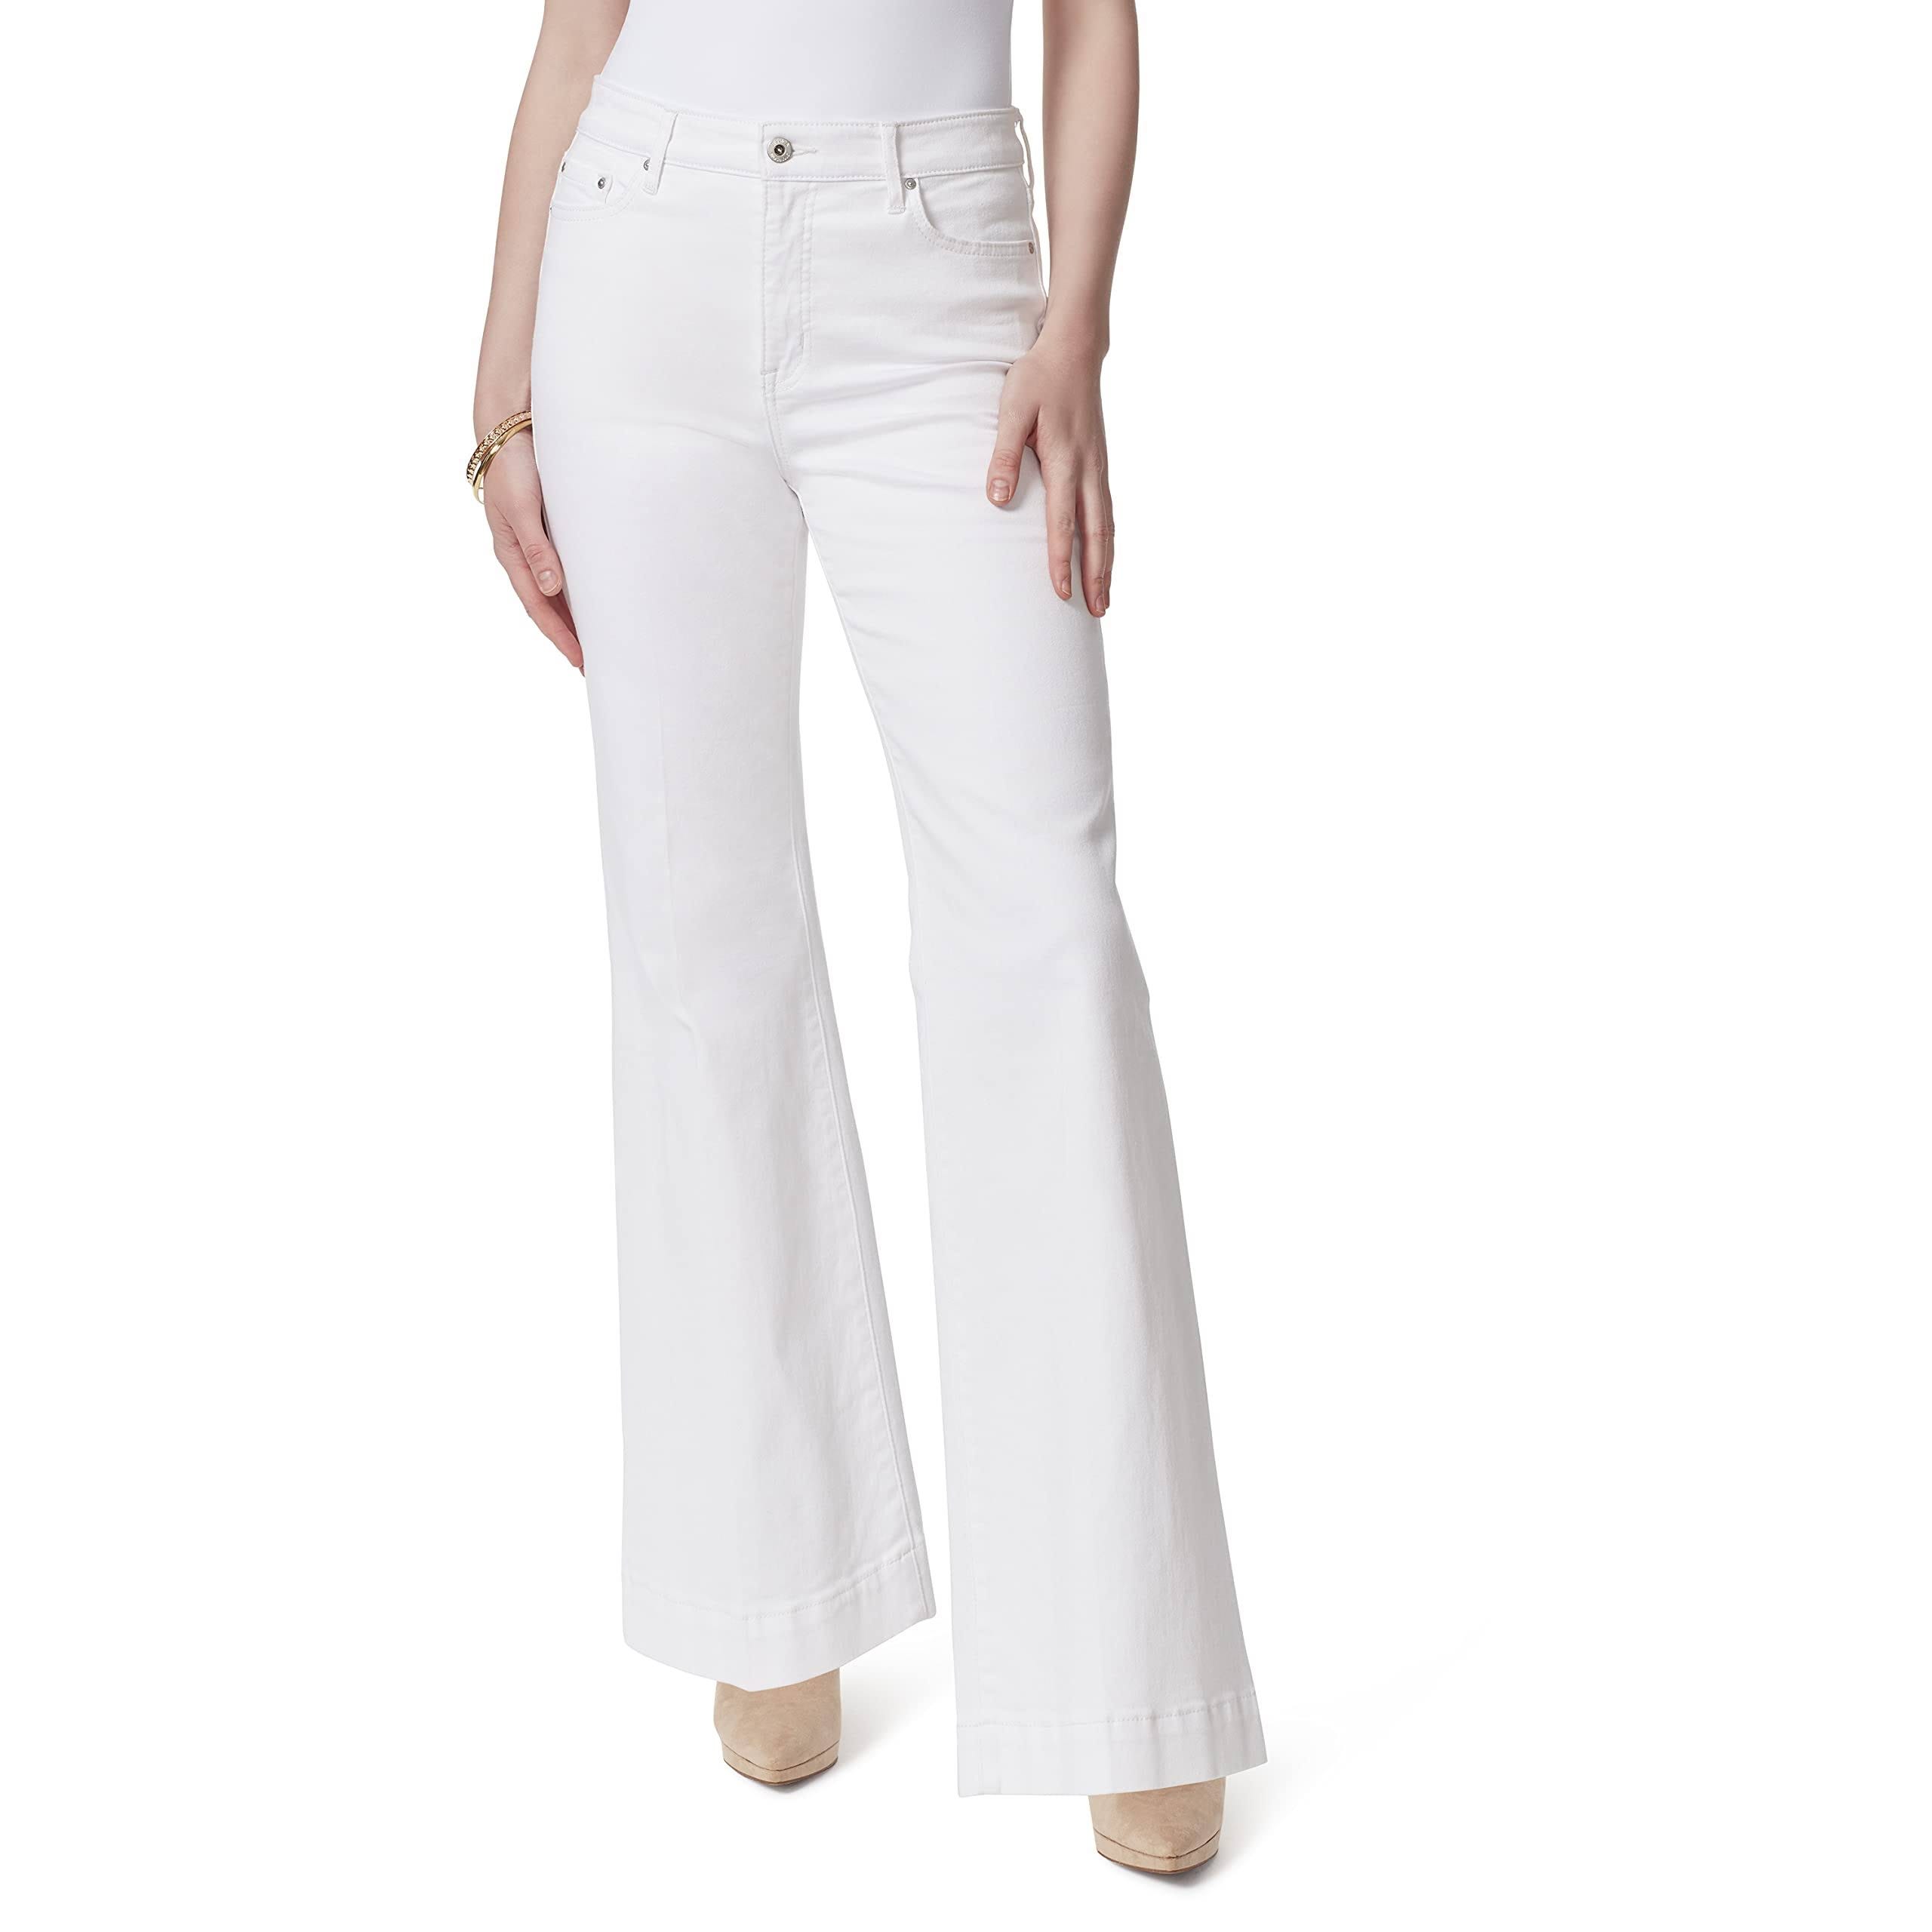 Retro-Inspired High-Rise White Wide Leg Jeans by Jessica Simpson | Image